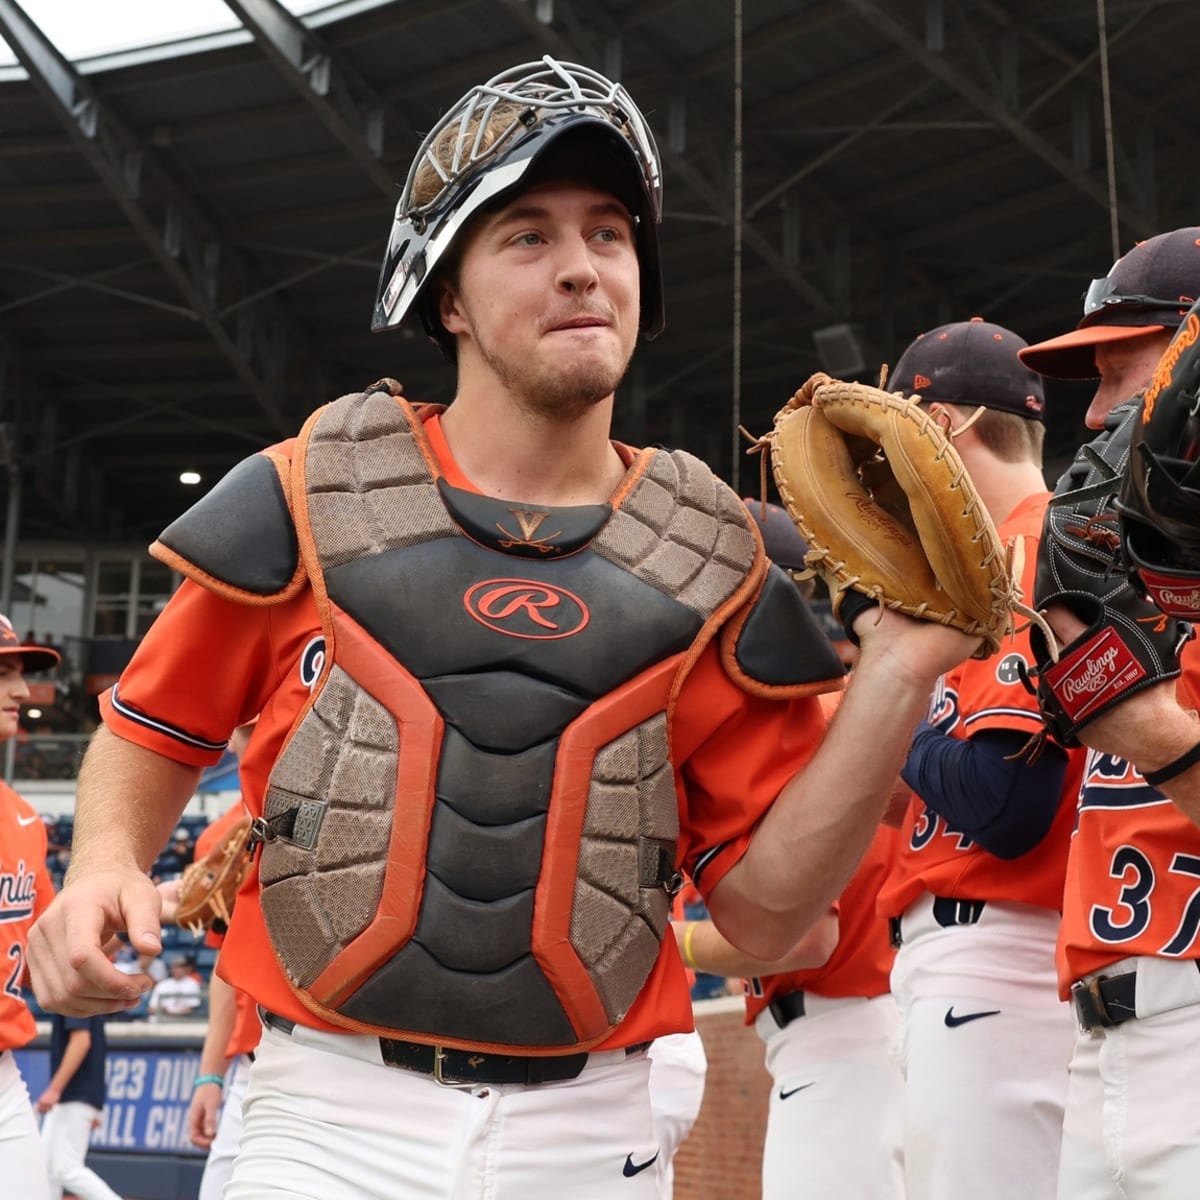 Kyle Teel Selected No. 14 Overall by Boston Red Sox in 2023 MLB Draft -  Sports Illustrated Virginia Cavaliers News, Analysis and More